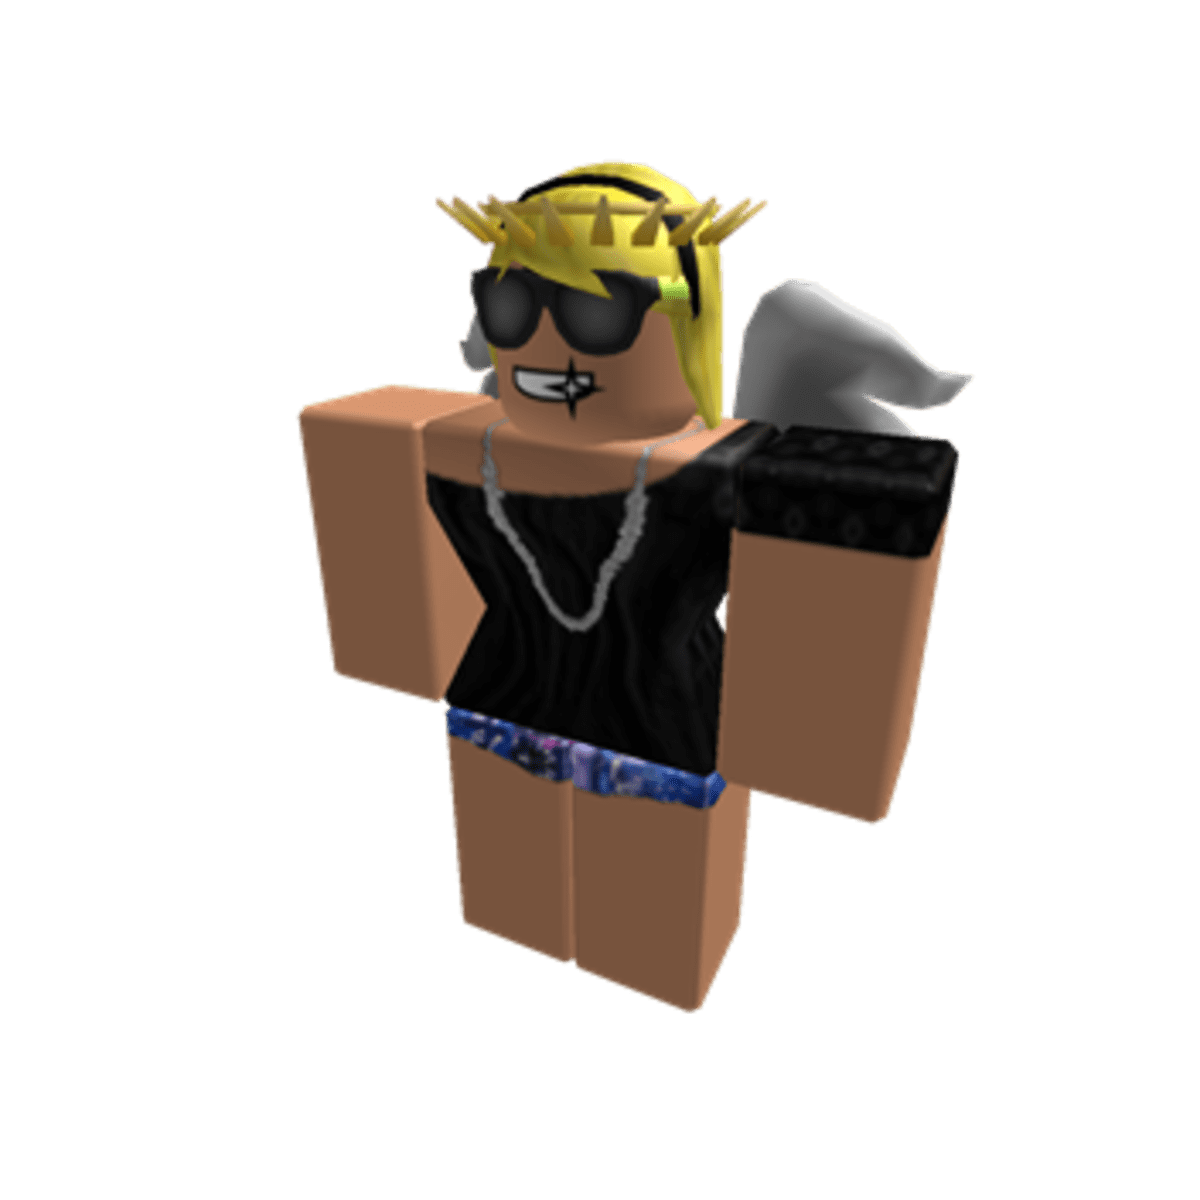 Top 10 Most hated Roblox Users - HubPages